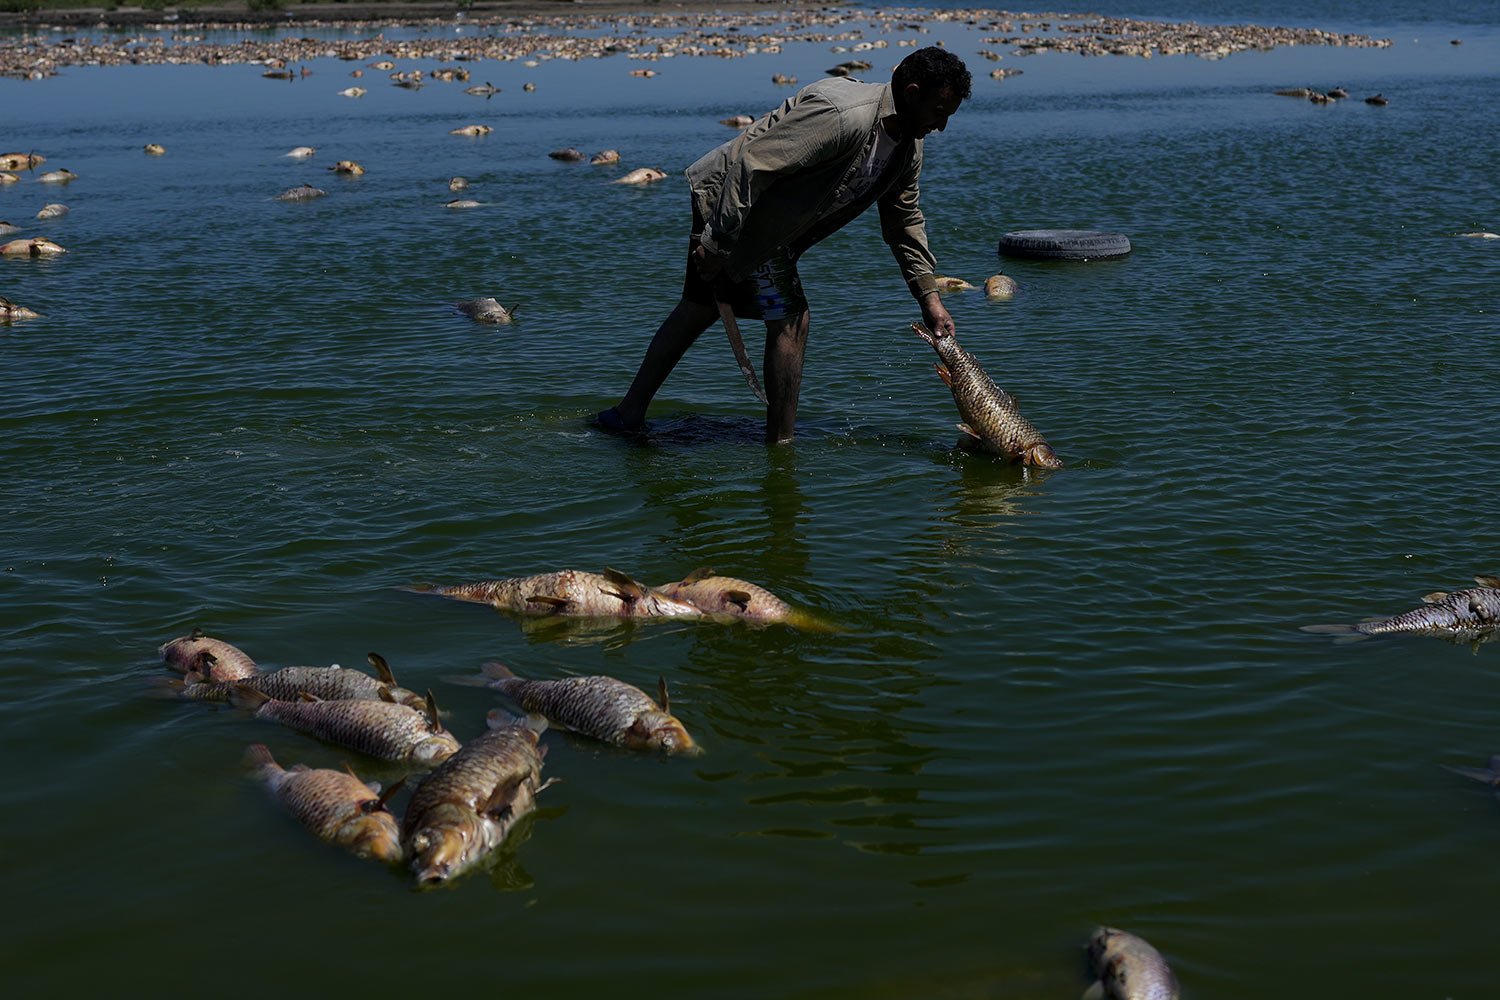  A man searches for fish that are still alive amid dead fish agglomerated on the shore of the Salado River during a drought in Buenos Aires province, Argentina, Jan. 22, 2023. (AP Photo/Natacha Pisarenko) 